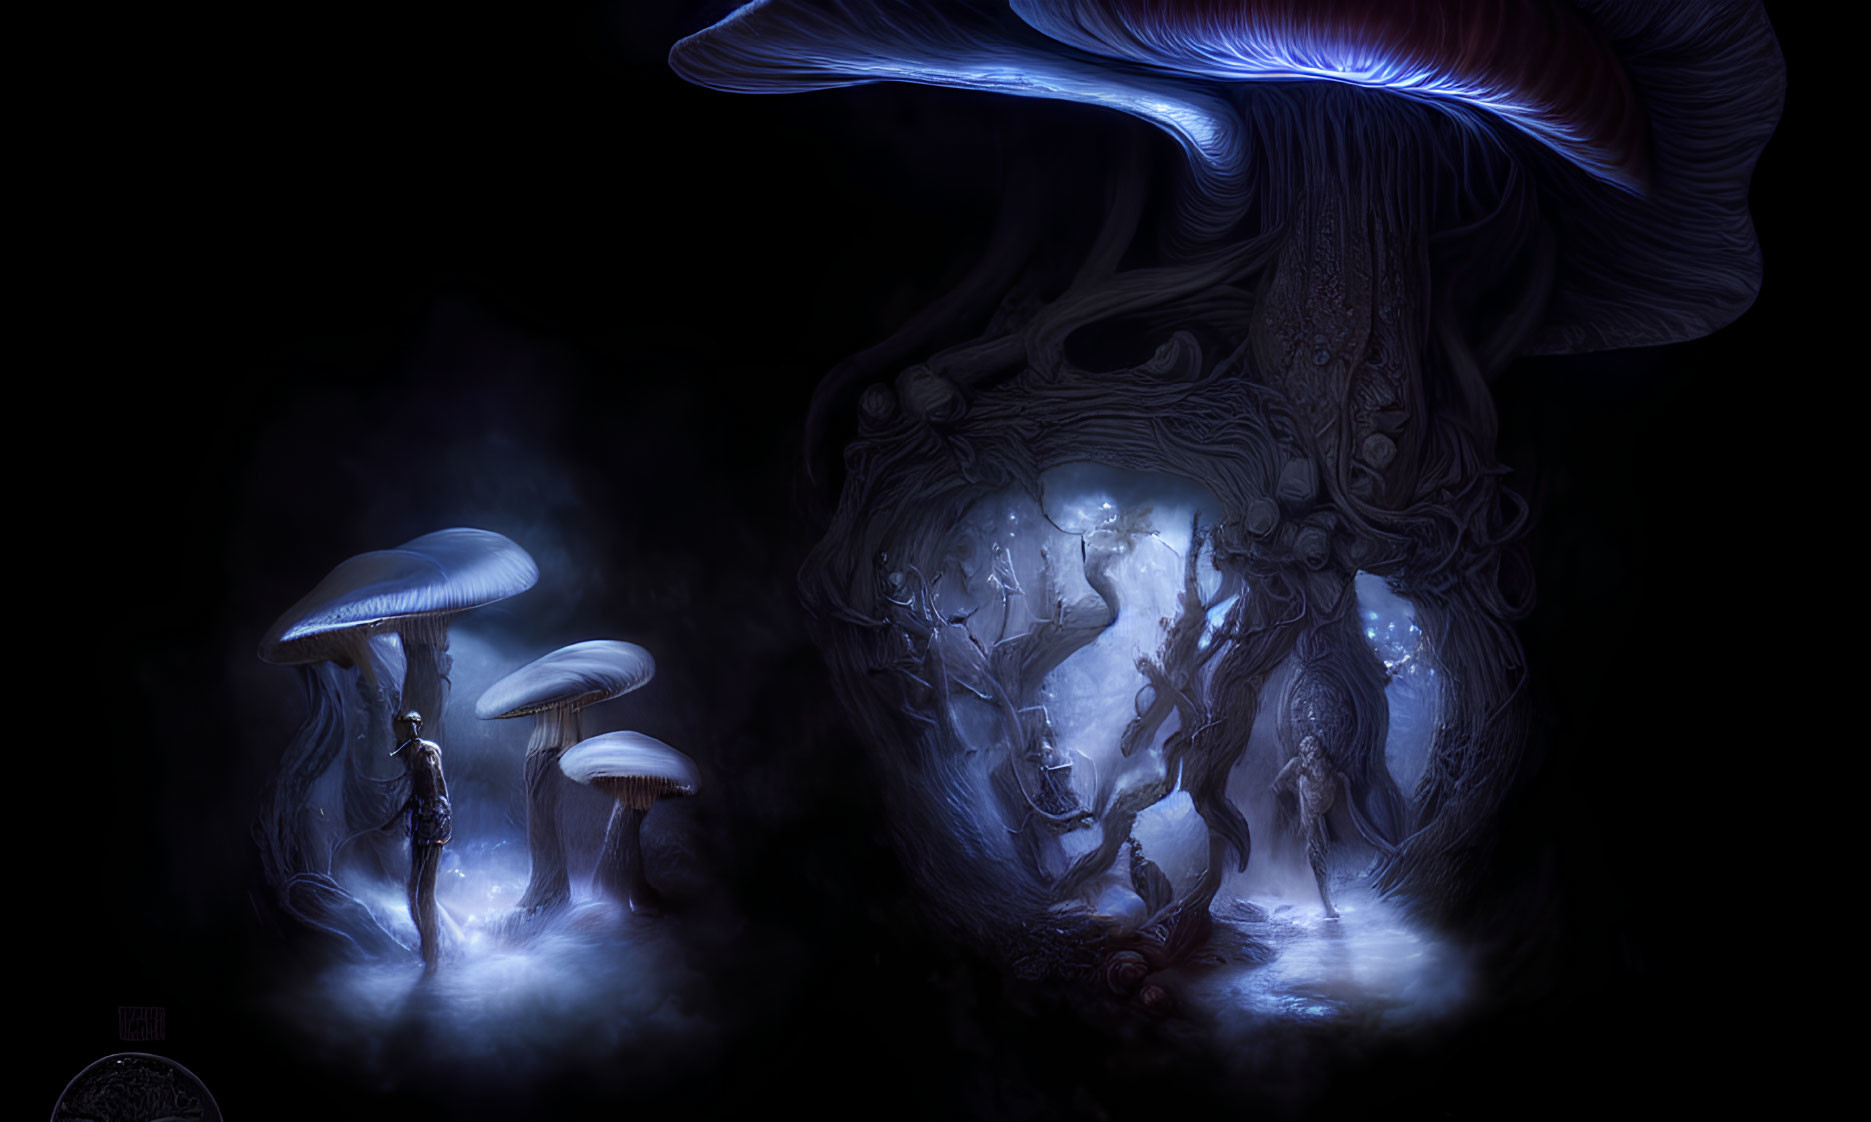 Enchanted forest with glowing mushrooms and figures